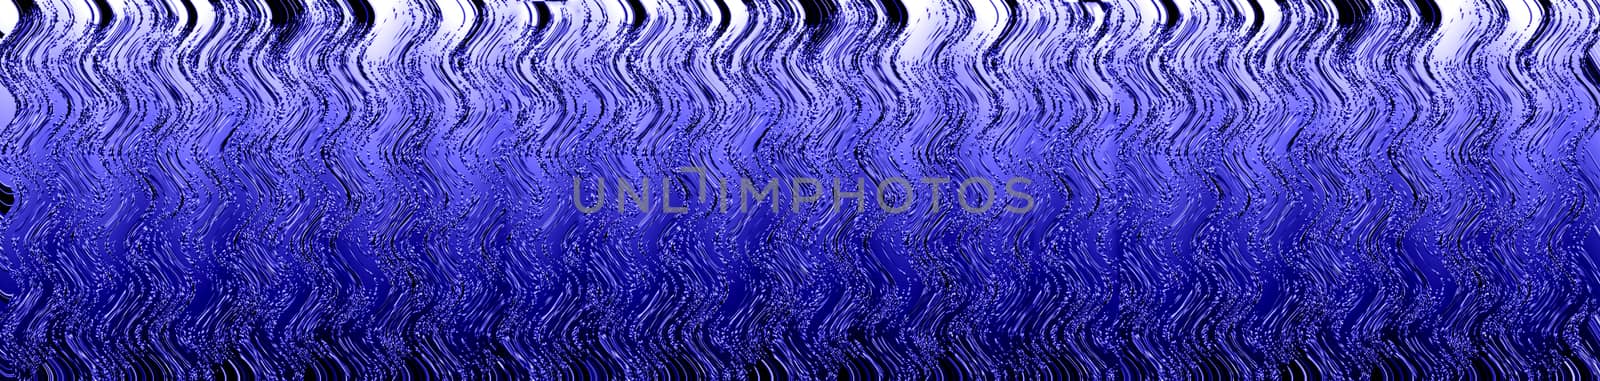 Frosty blue glass surface with wavy ice patterns by DamantisZ